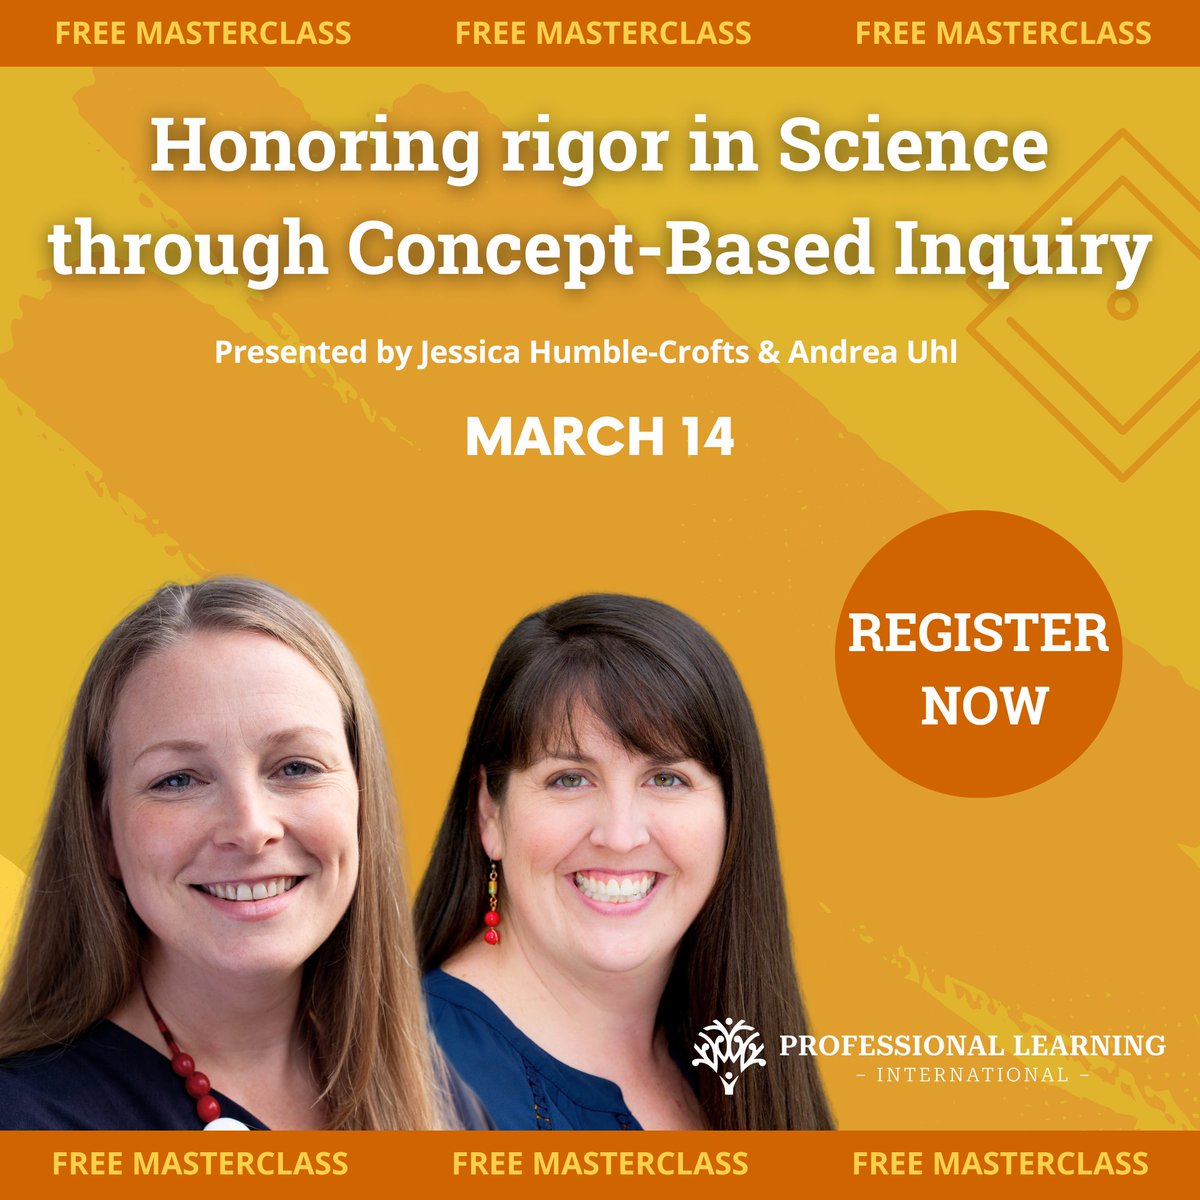 🚨 Science educators! Join our Masterclass on March 14, with Andrea Uhl & Jessica Humble-Crofts. Discover Concept-Based Inquiry strategies to enrich your science curriculum. Register free: bit.ly/3Qoyyg3